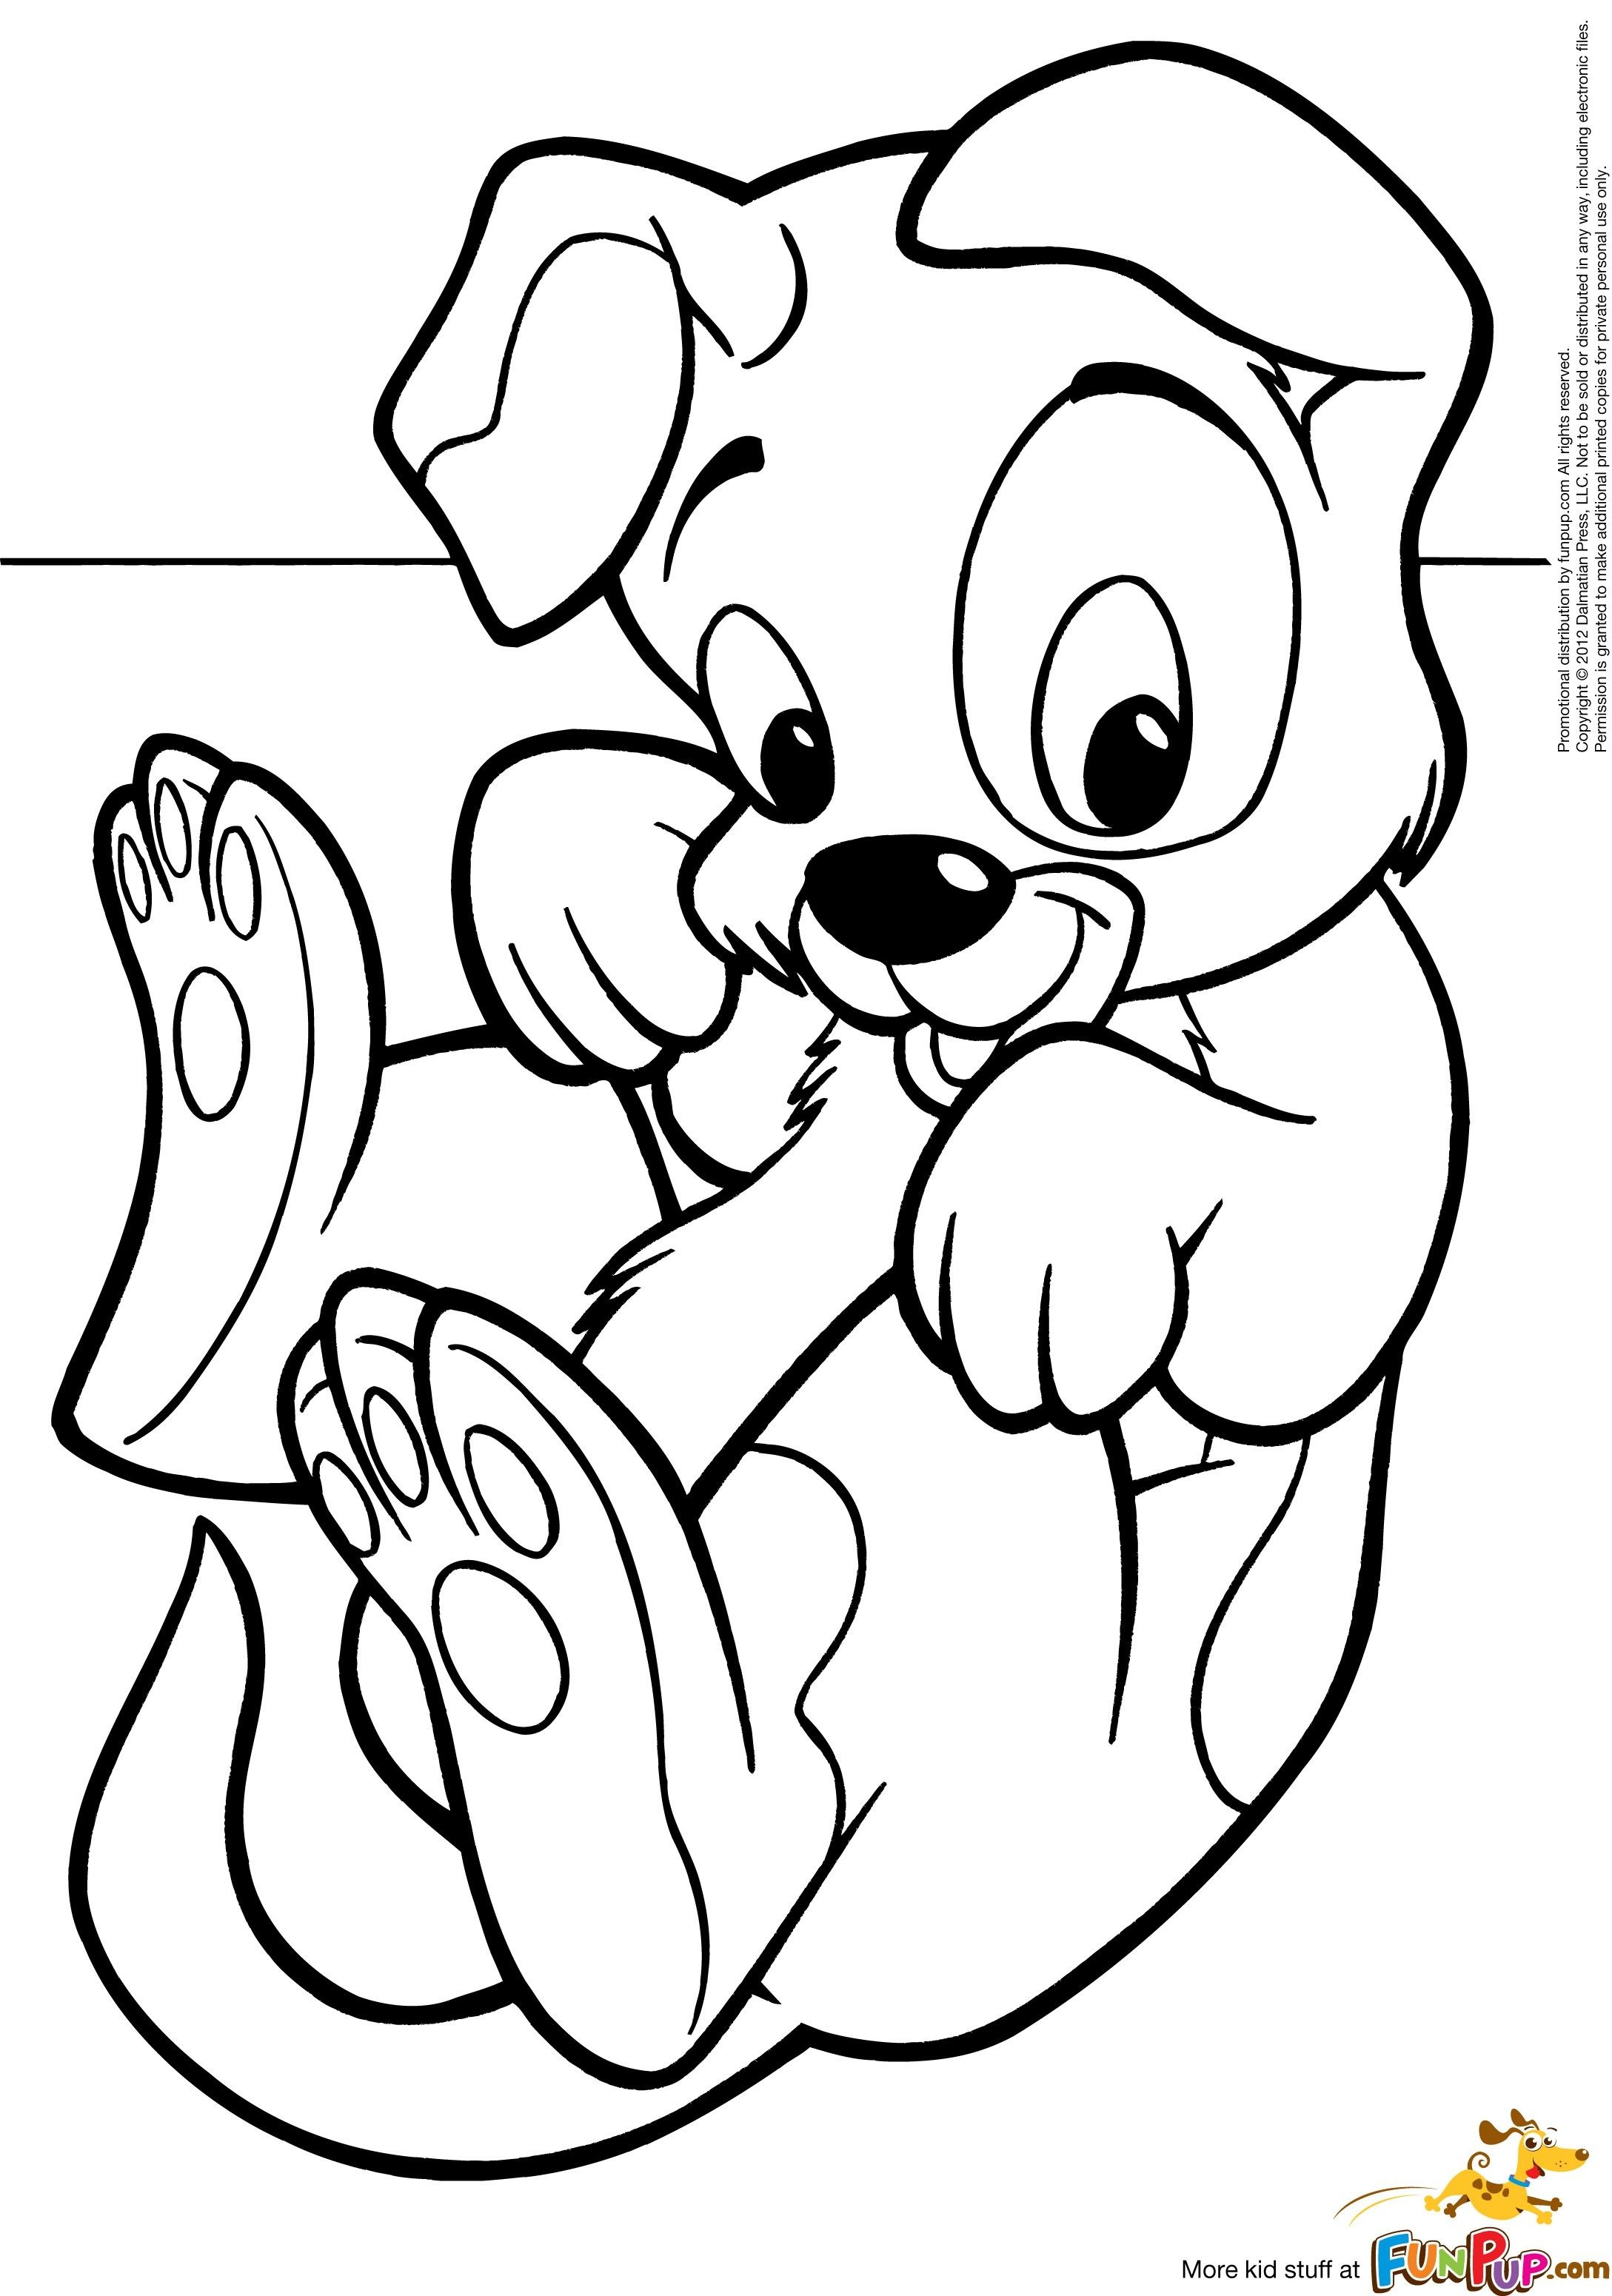 Puppy Coloring Pages - Free Large Images | Coloring Pages | Dog - Free Printable Dog Coloring Pages